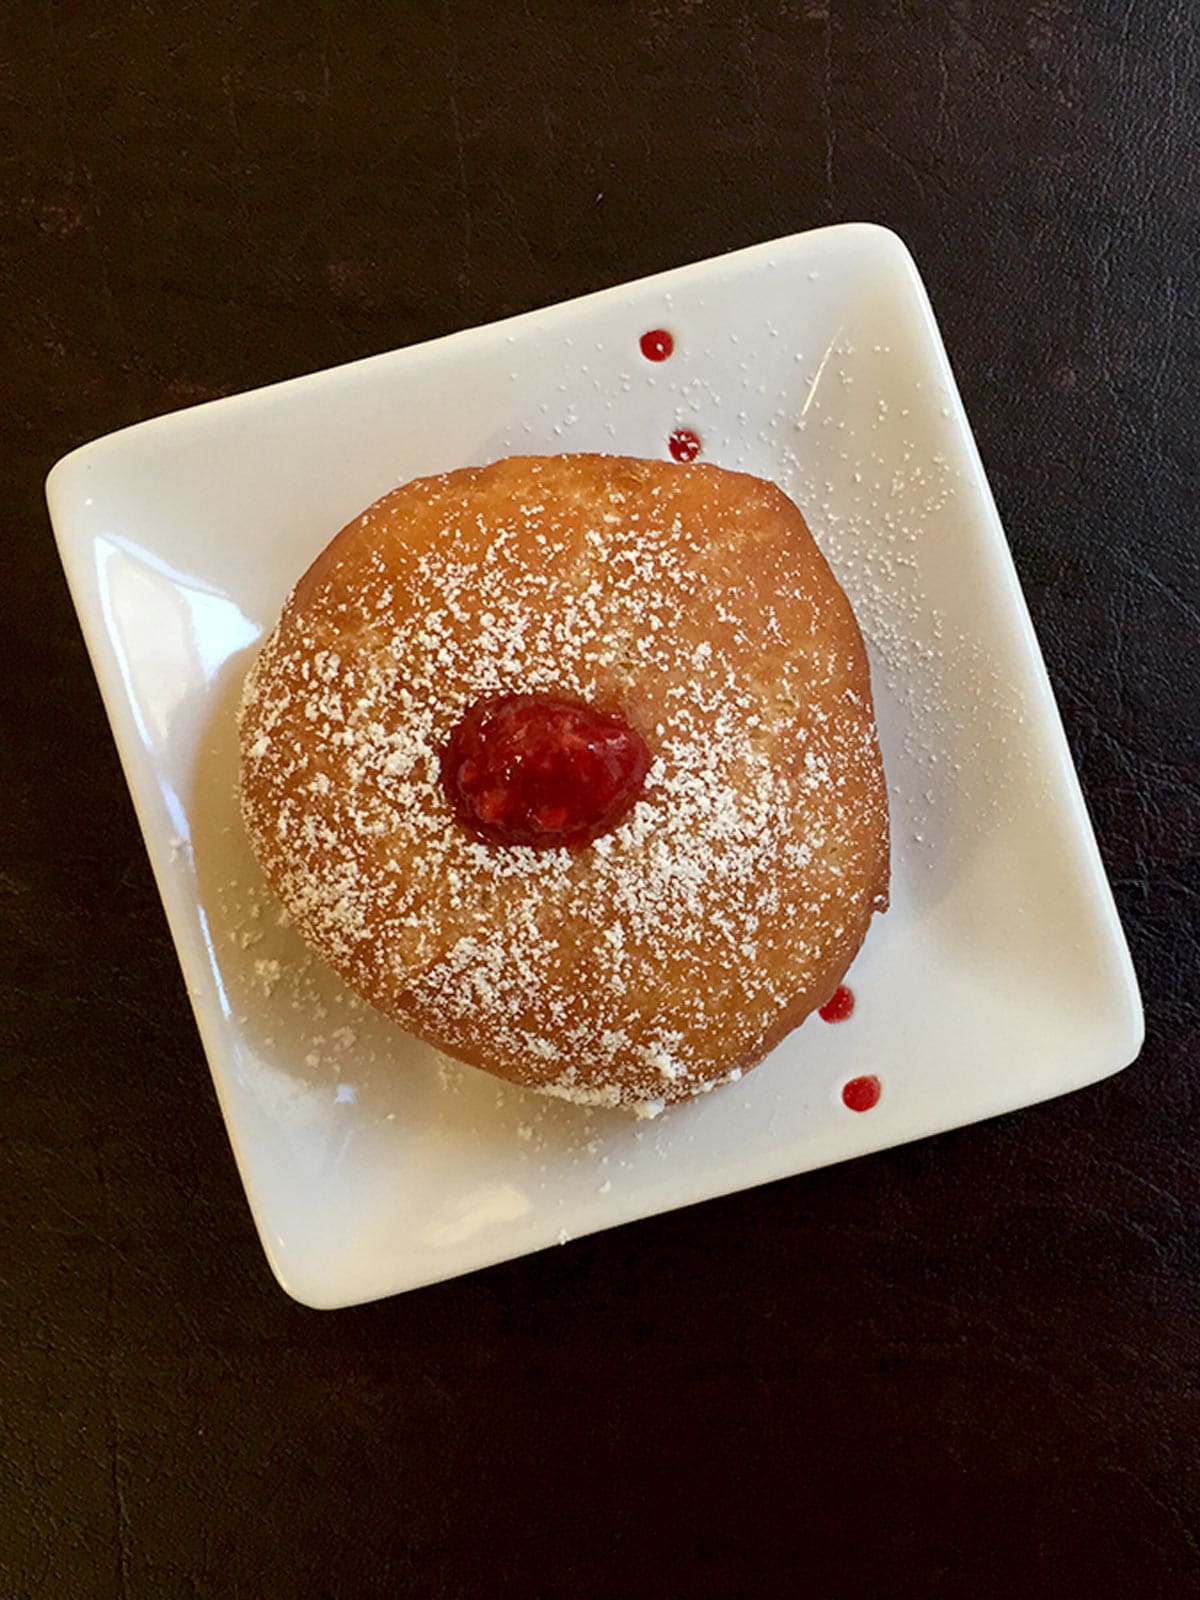 A soufganiyot (round jelly doughnut) on a white plate with powdered sugar.